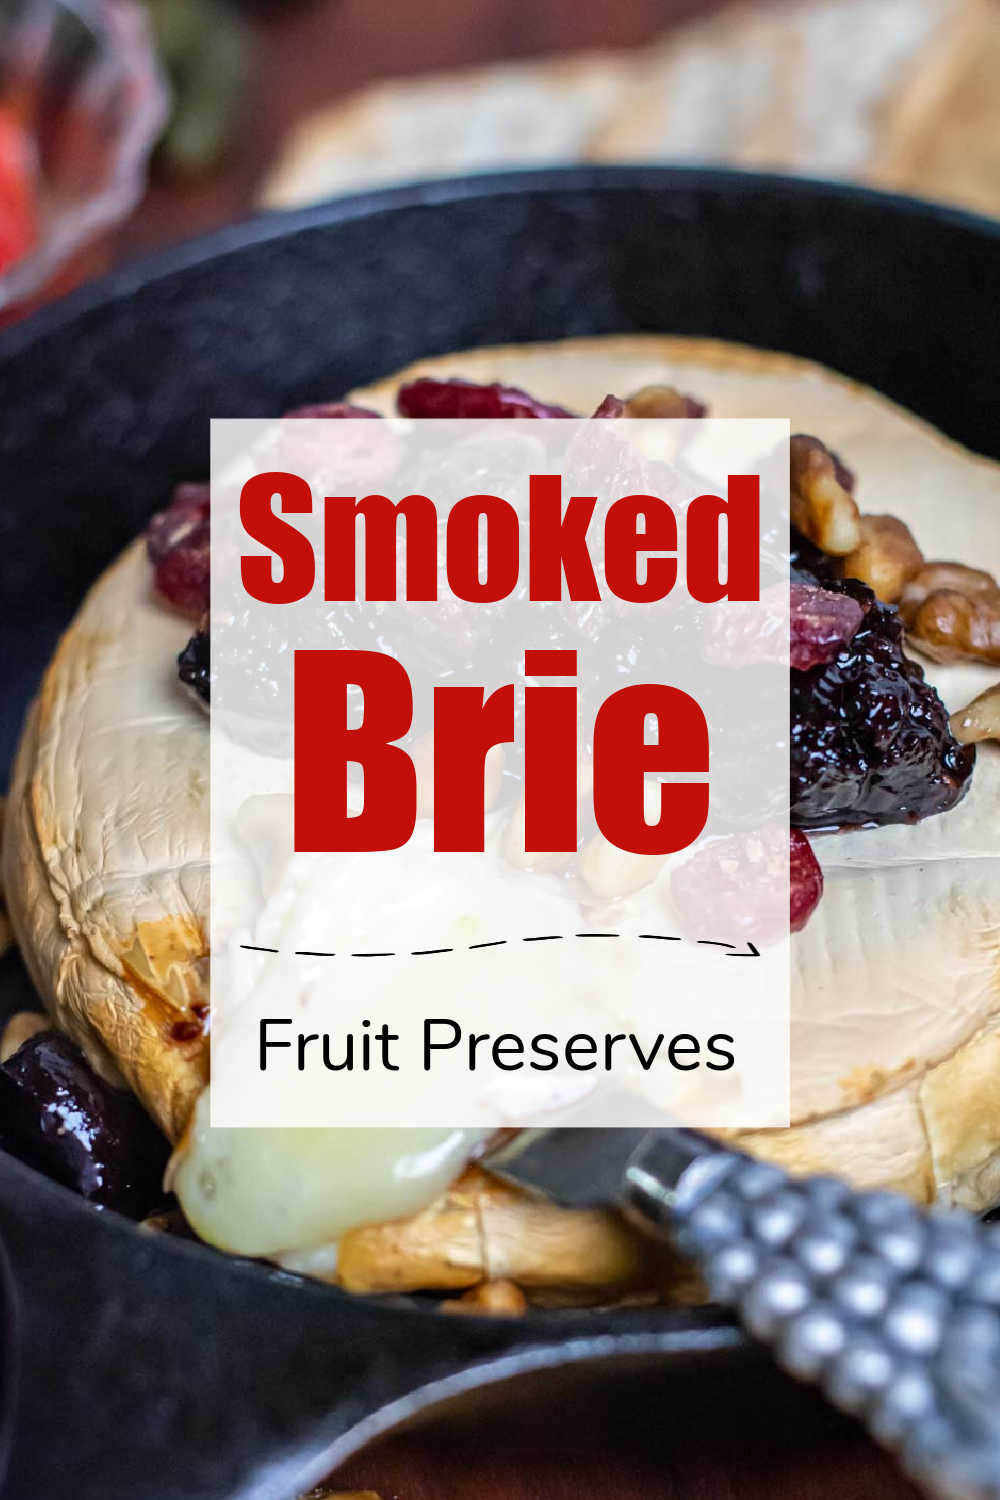 Smoked Baked Brie